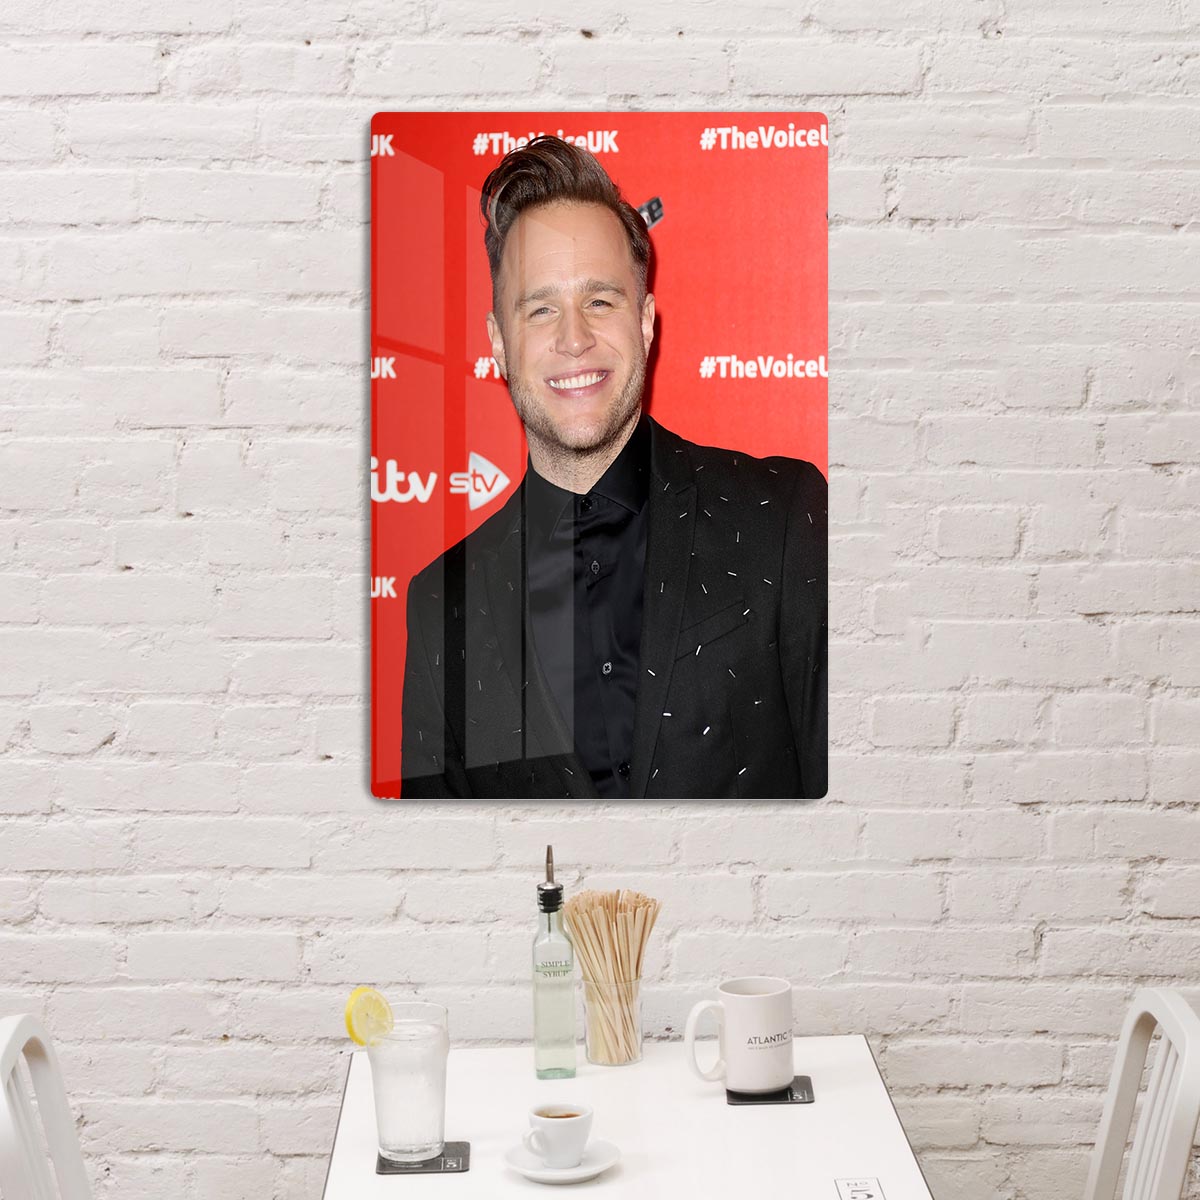 Olly Murs The Voice HD Metal Print